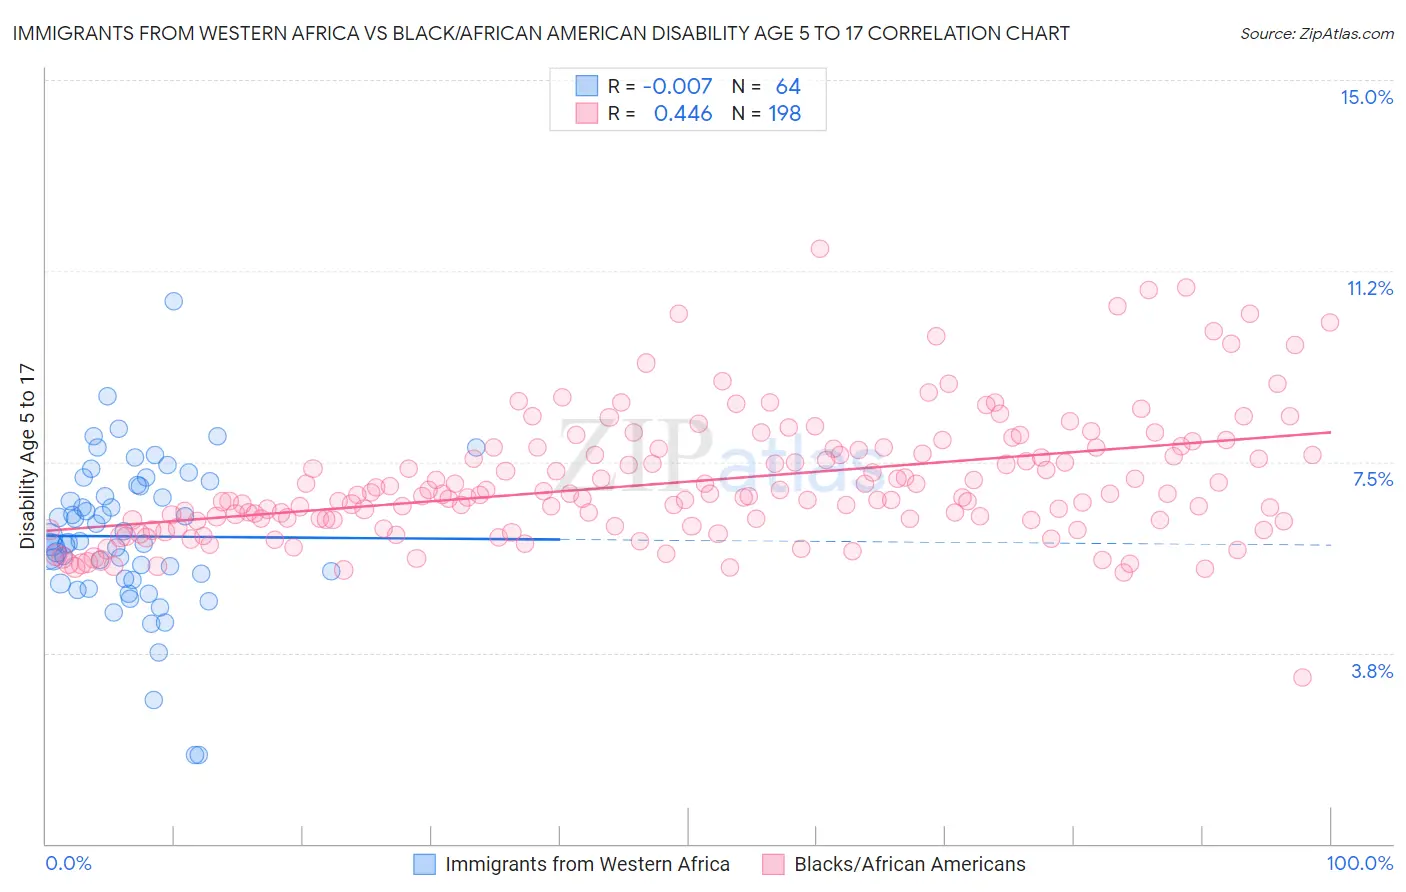 Immigrants from Western Africa vs Black/African American Disability Age 5 to 17